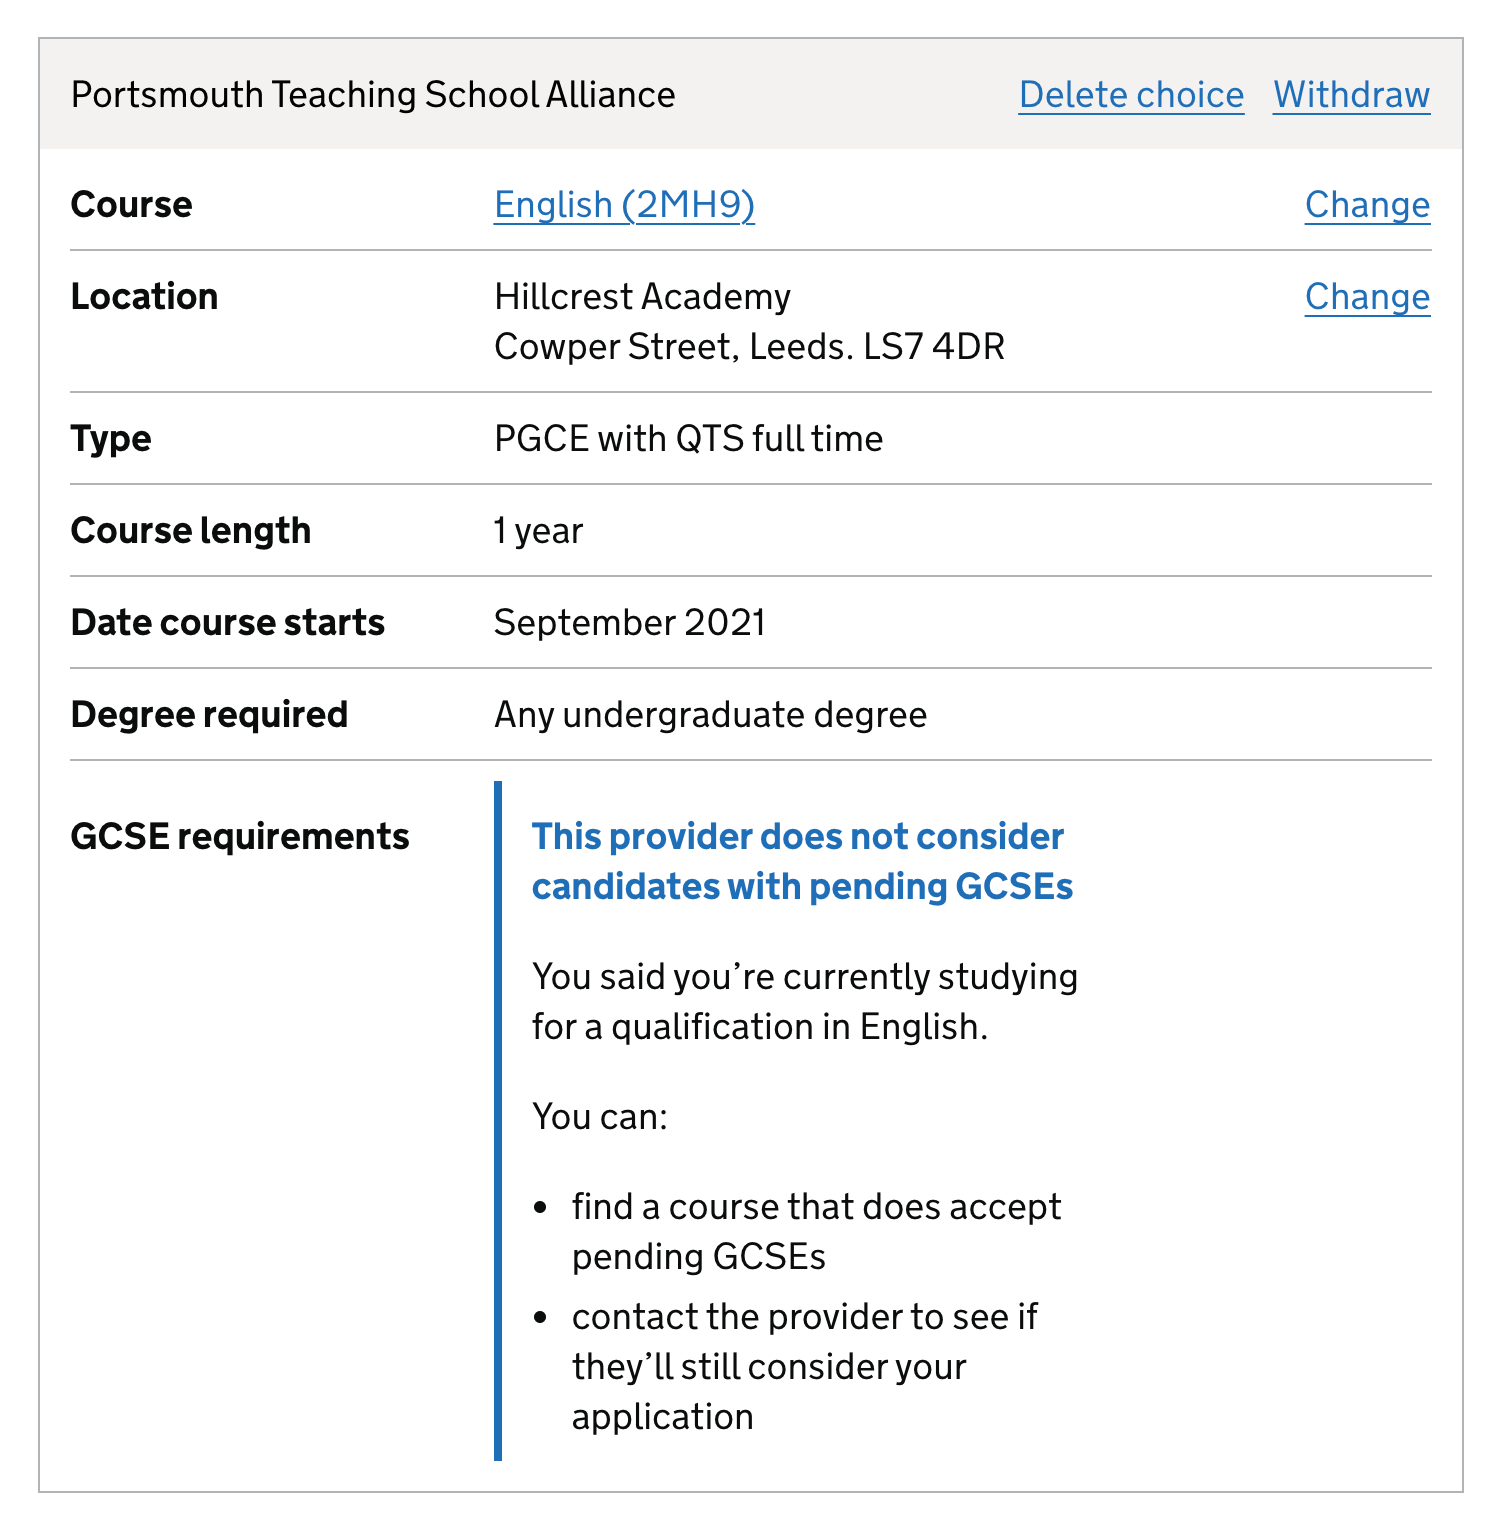 Screenshot of course choice that does not accept pending GCSEs.